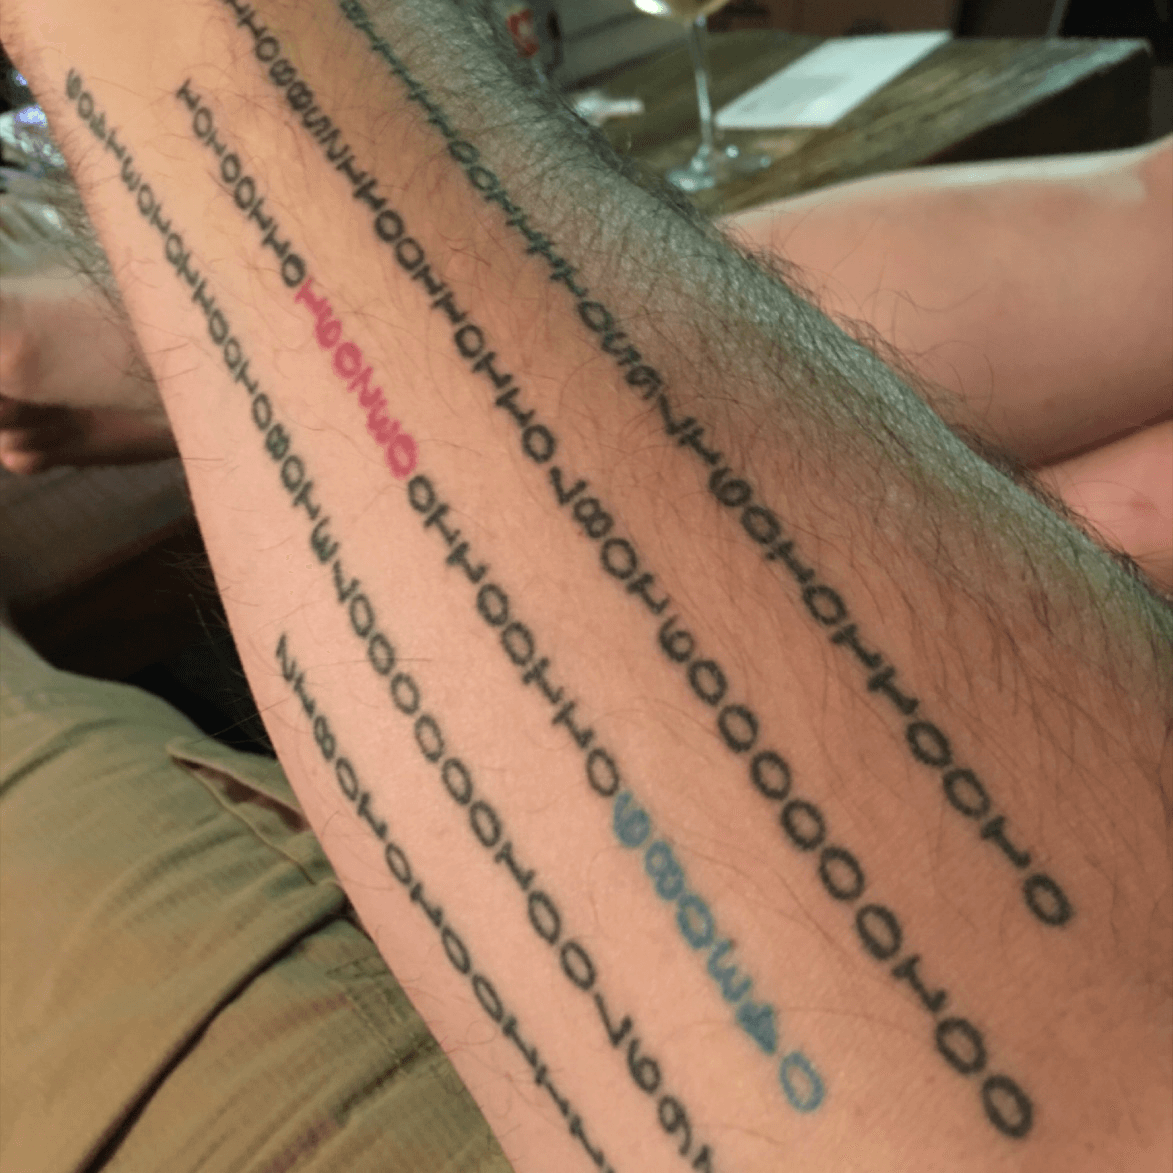 30 Binary Tattoo Designs For Men  Coded Ink Ideas  Tattoo designs men  Tattoo designs Tech tattoo